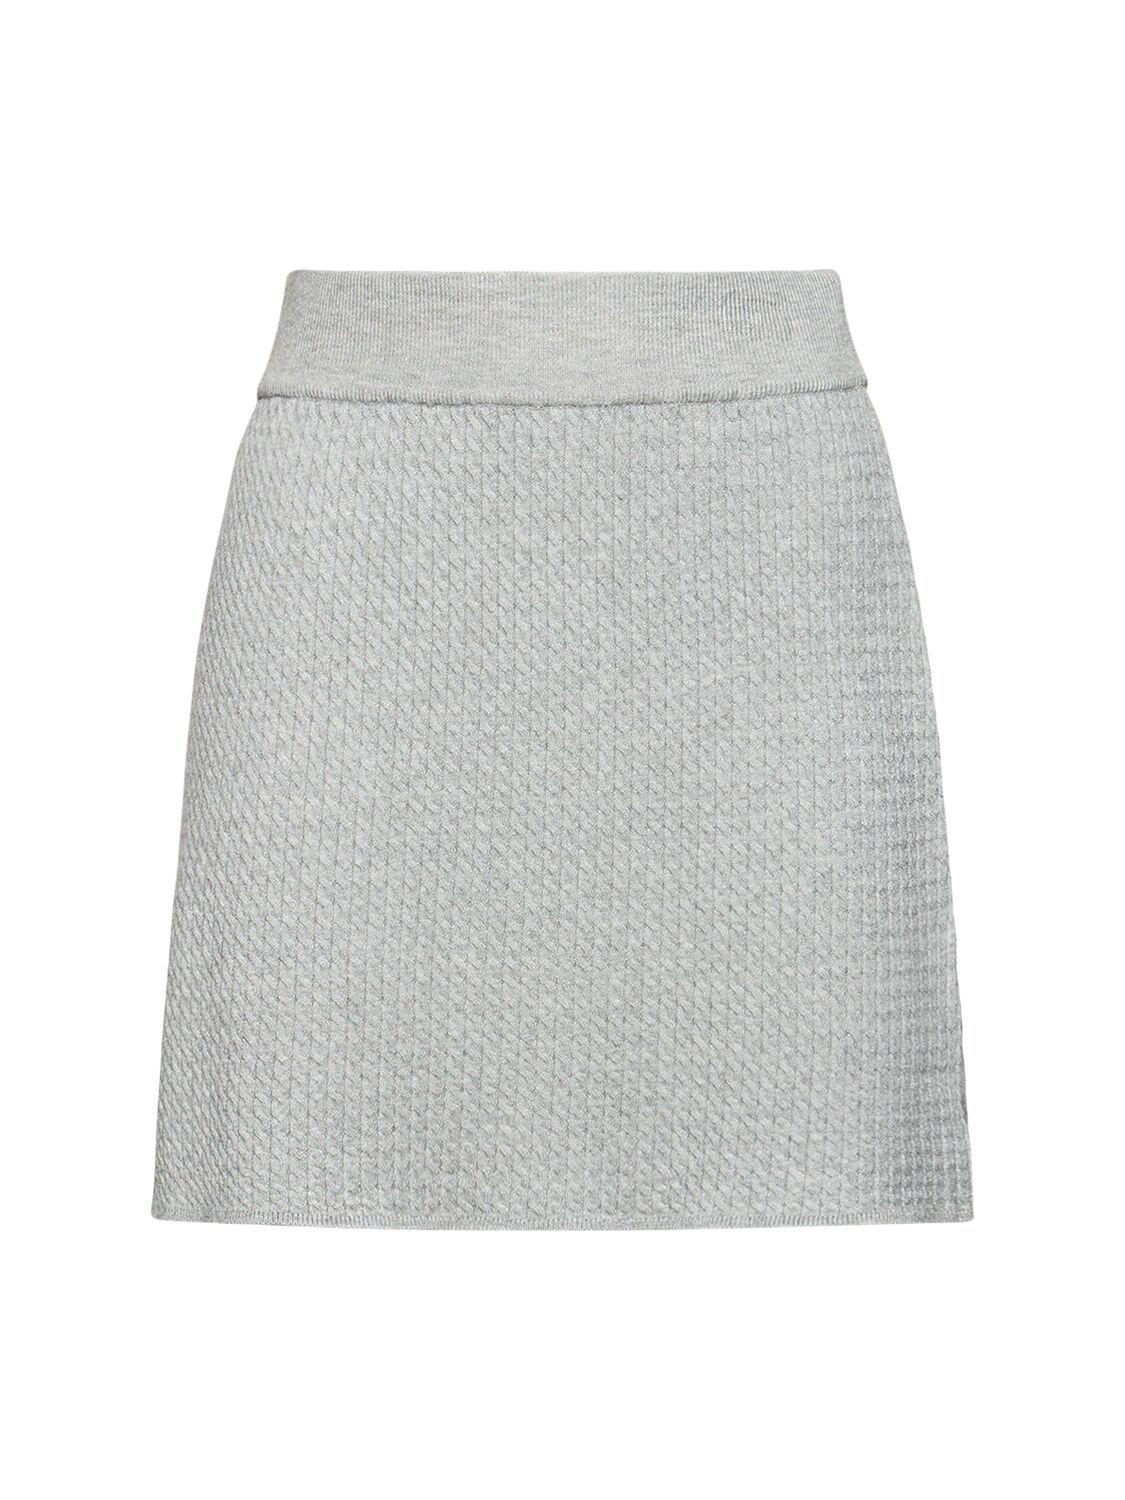 We Wore What Cable Knit Skirt in Gray | Lyst